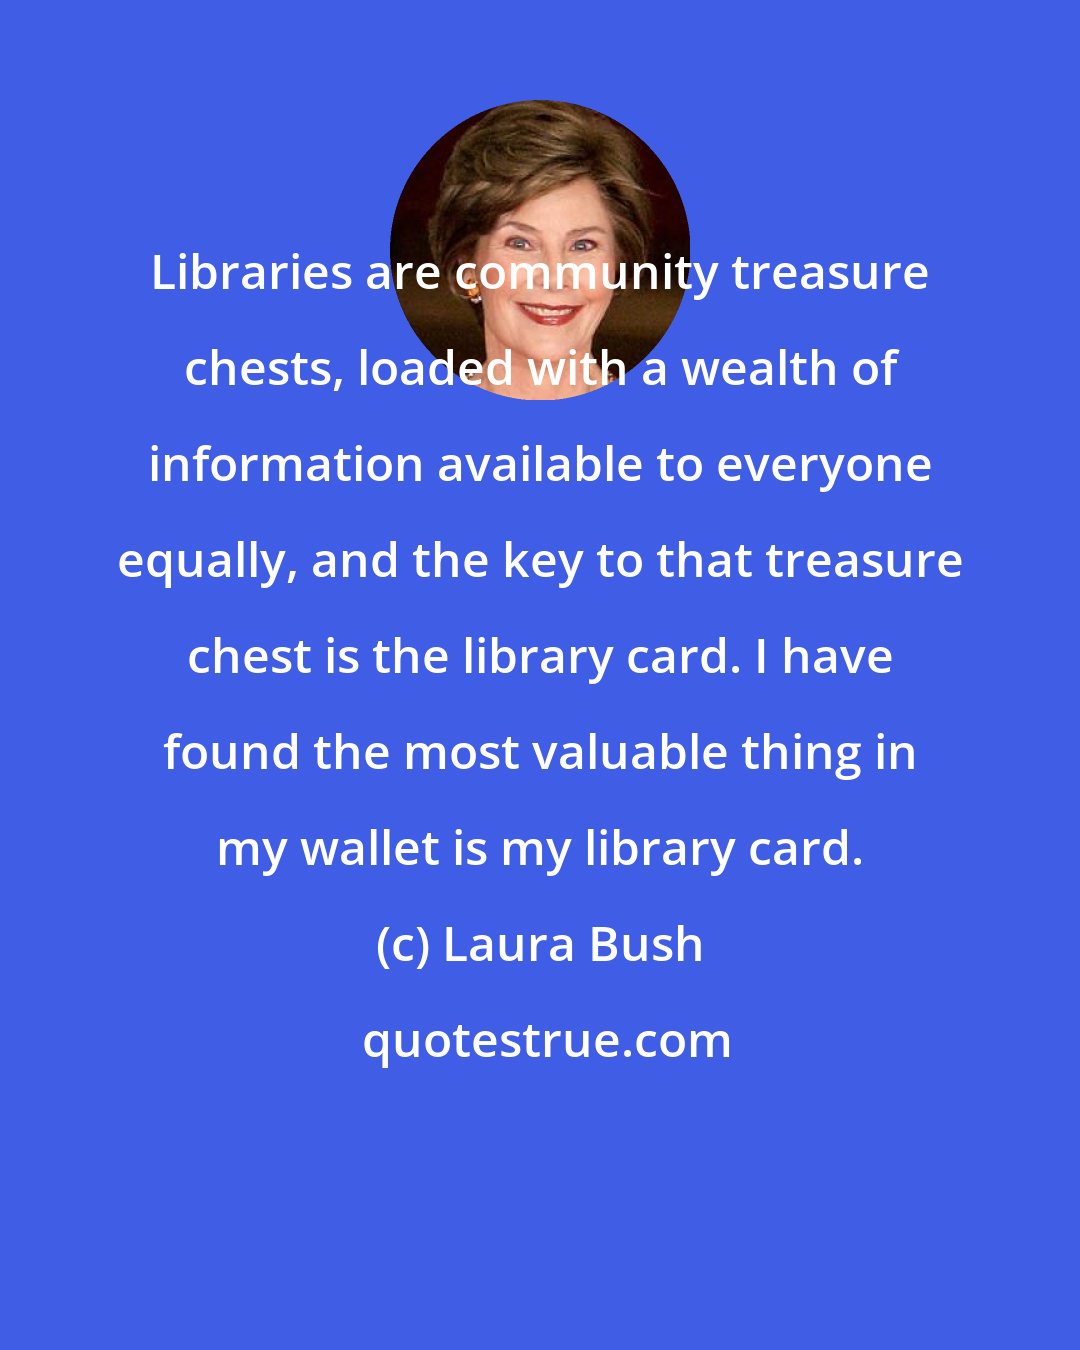 Laura Bush: Libraries are community treasure chests, loaded with a wealth of information available to everyone equally, and the key to that treasure chest is the library card. I have found the most valuable thing in my wallet is my library card.